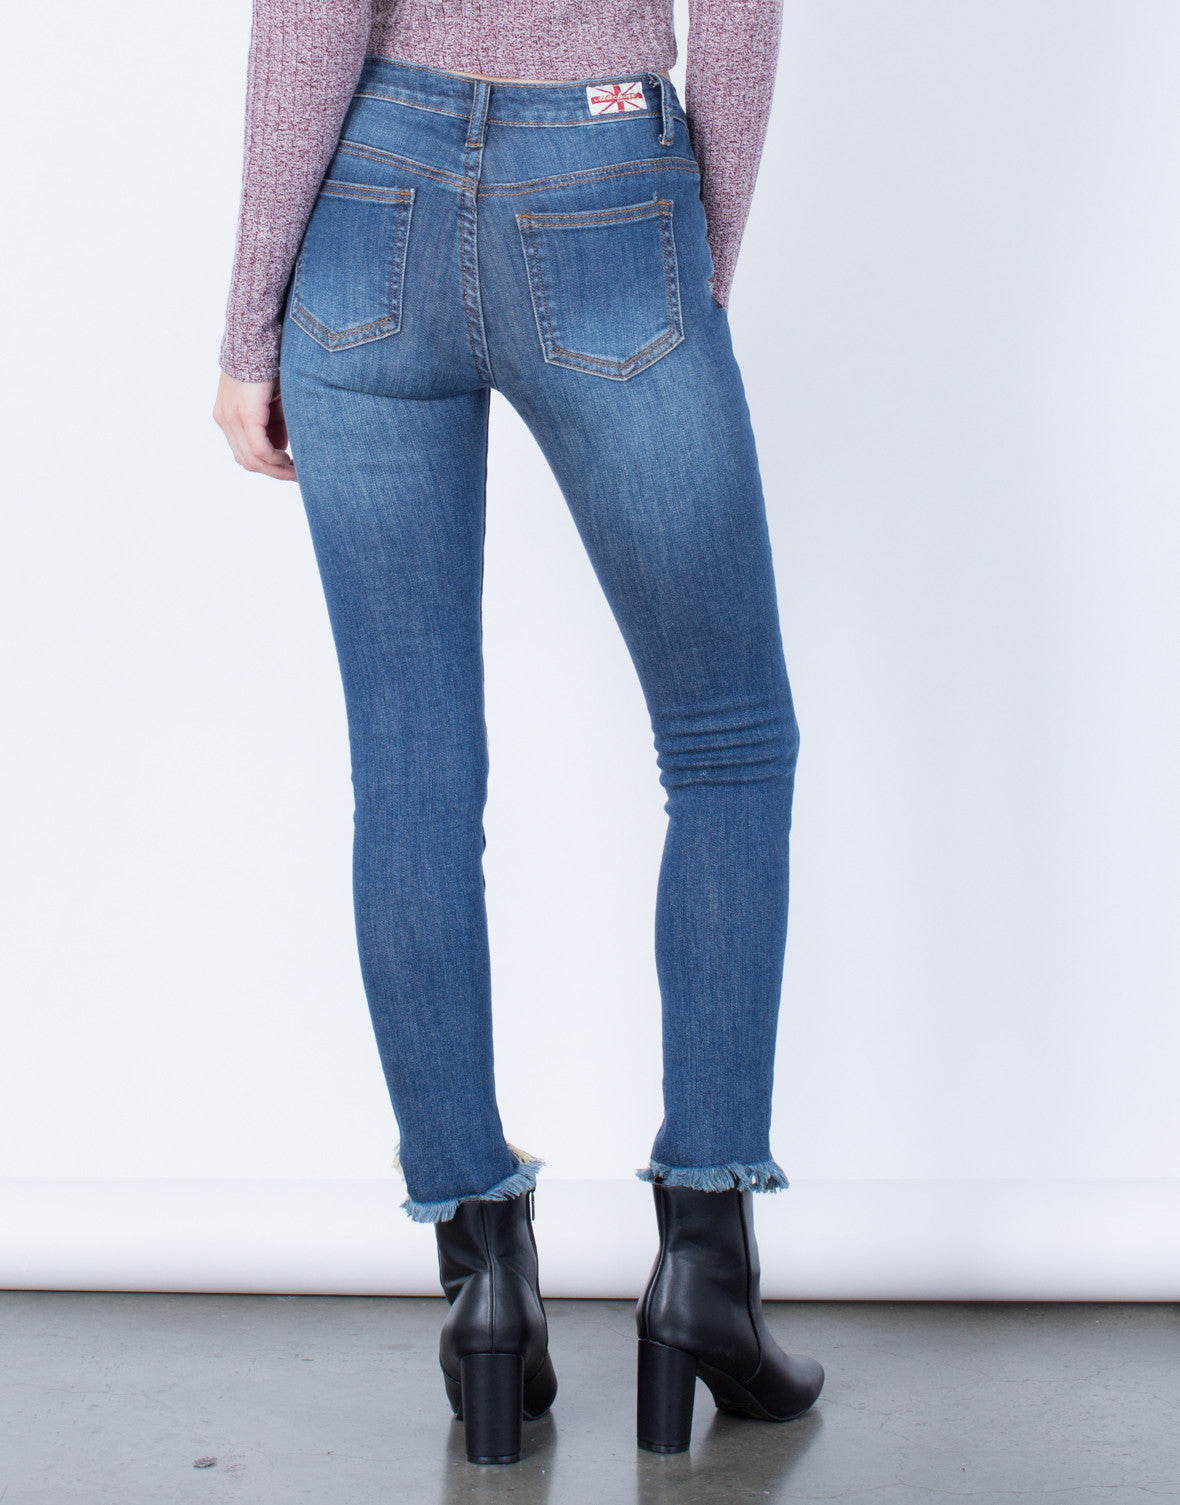 all-about-distressed-skinny-jeans-destroyed-blue-denim-jeans-2020ave